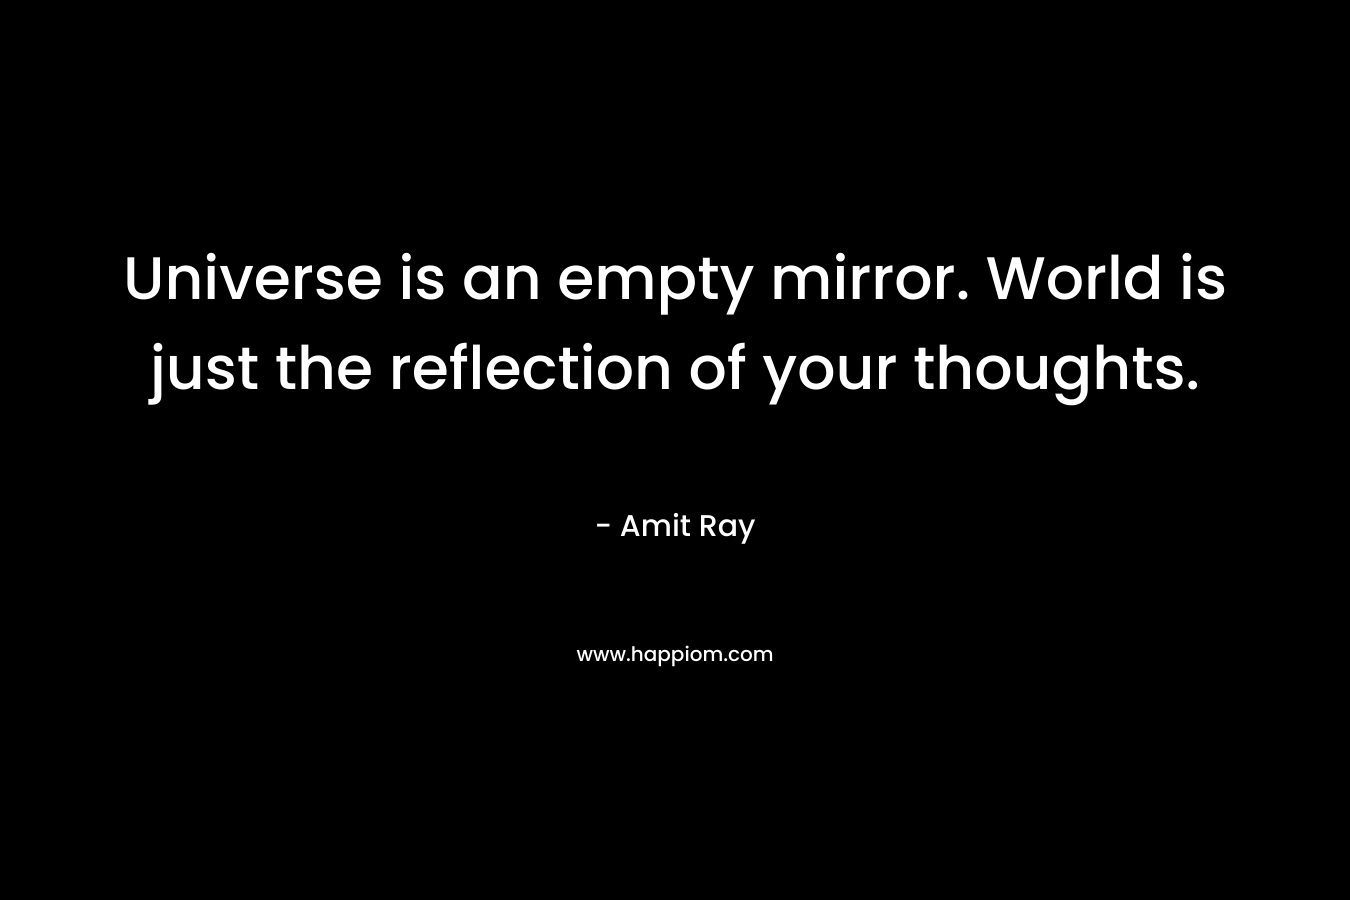 Universe is an empty mirror. World is just the reflection of your thoughts.